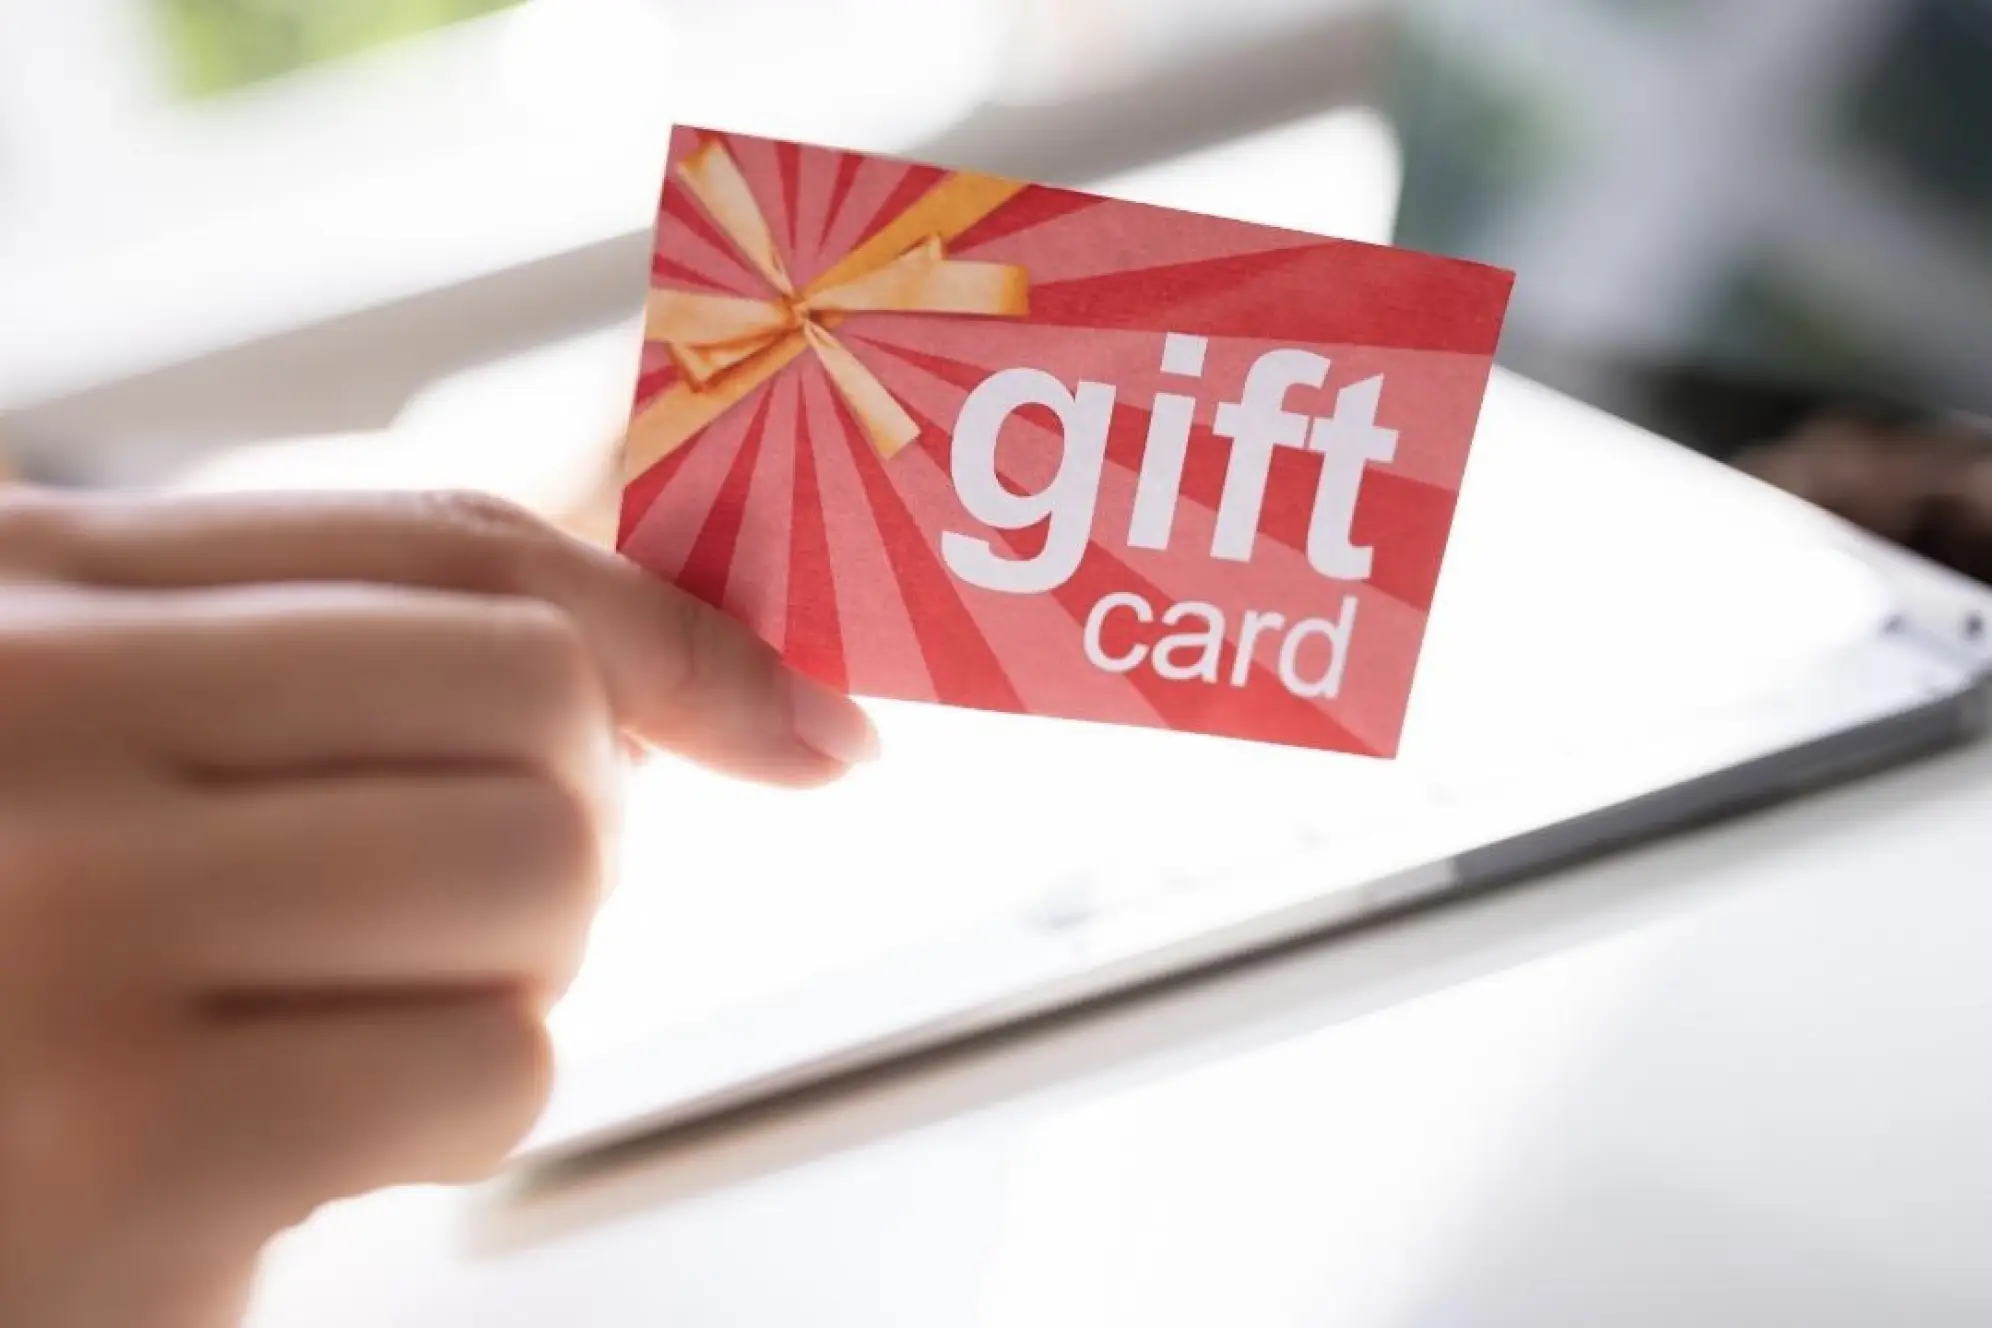 A hand holding up a red piece of paper that says "gift" card" in large type